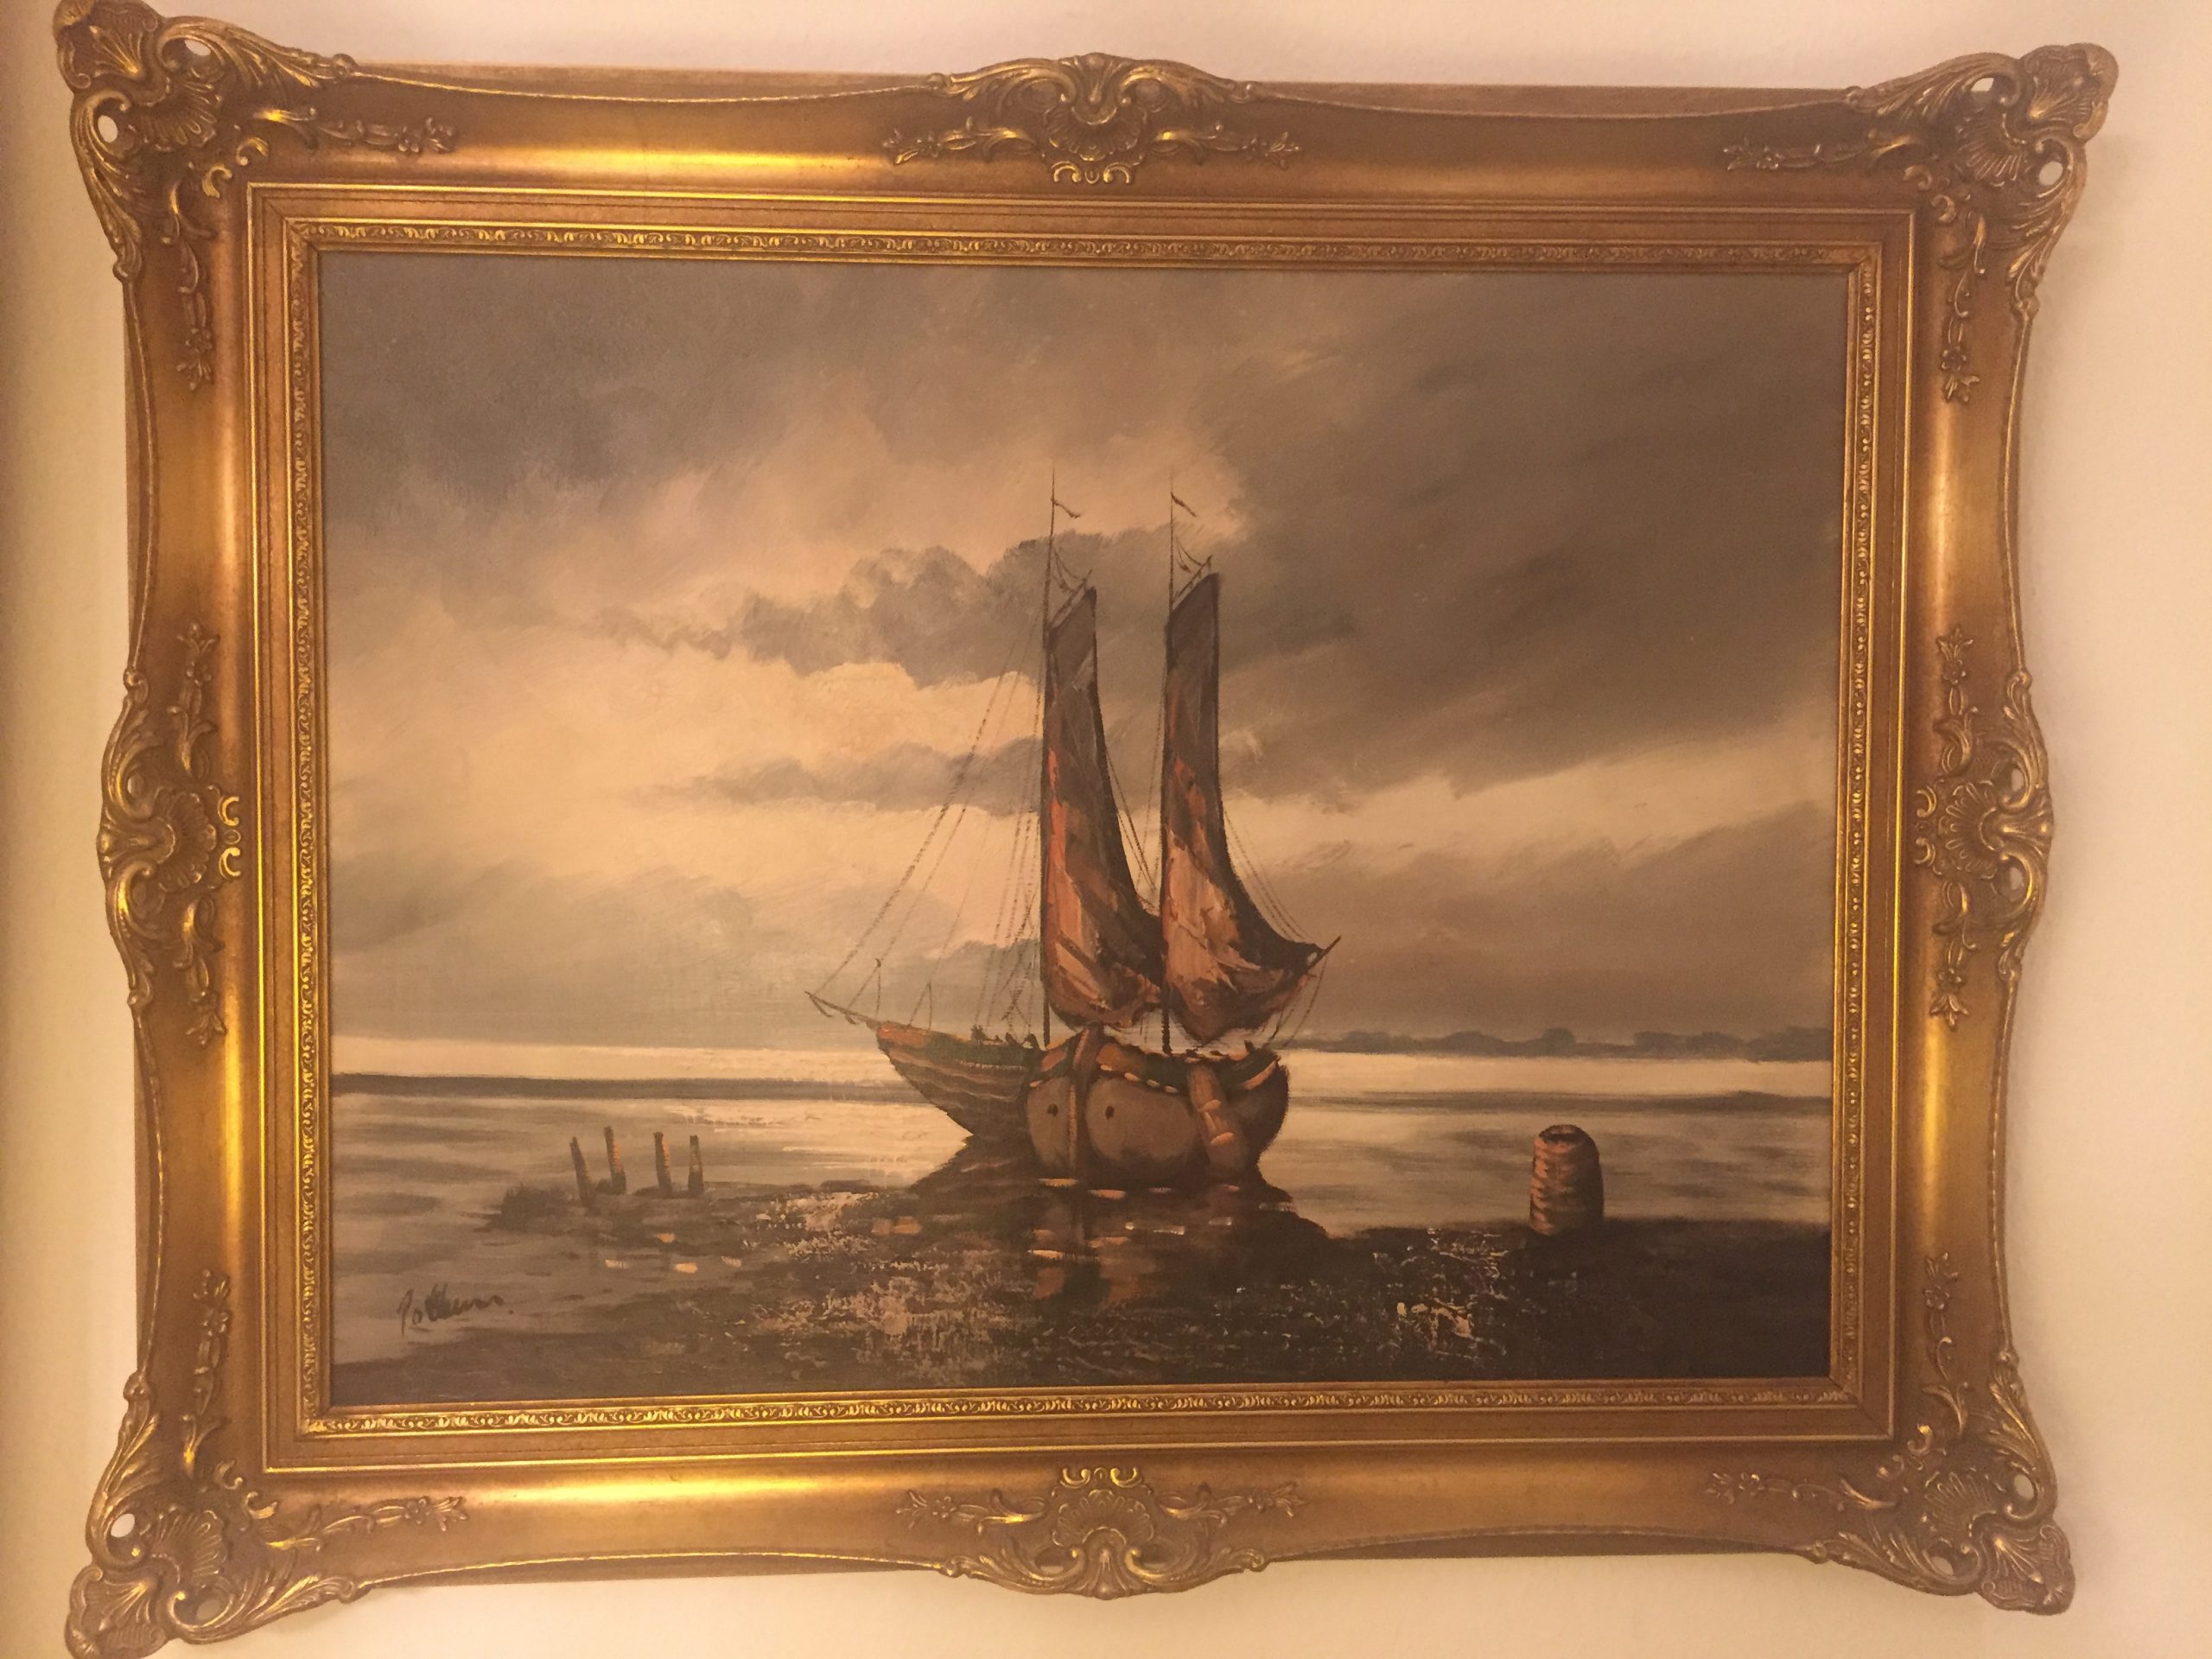 Two ships on sea / Oil on canvas